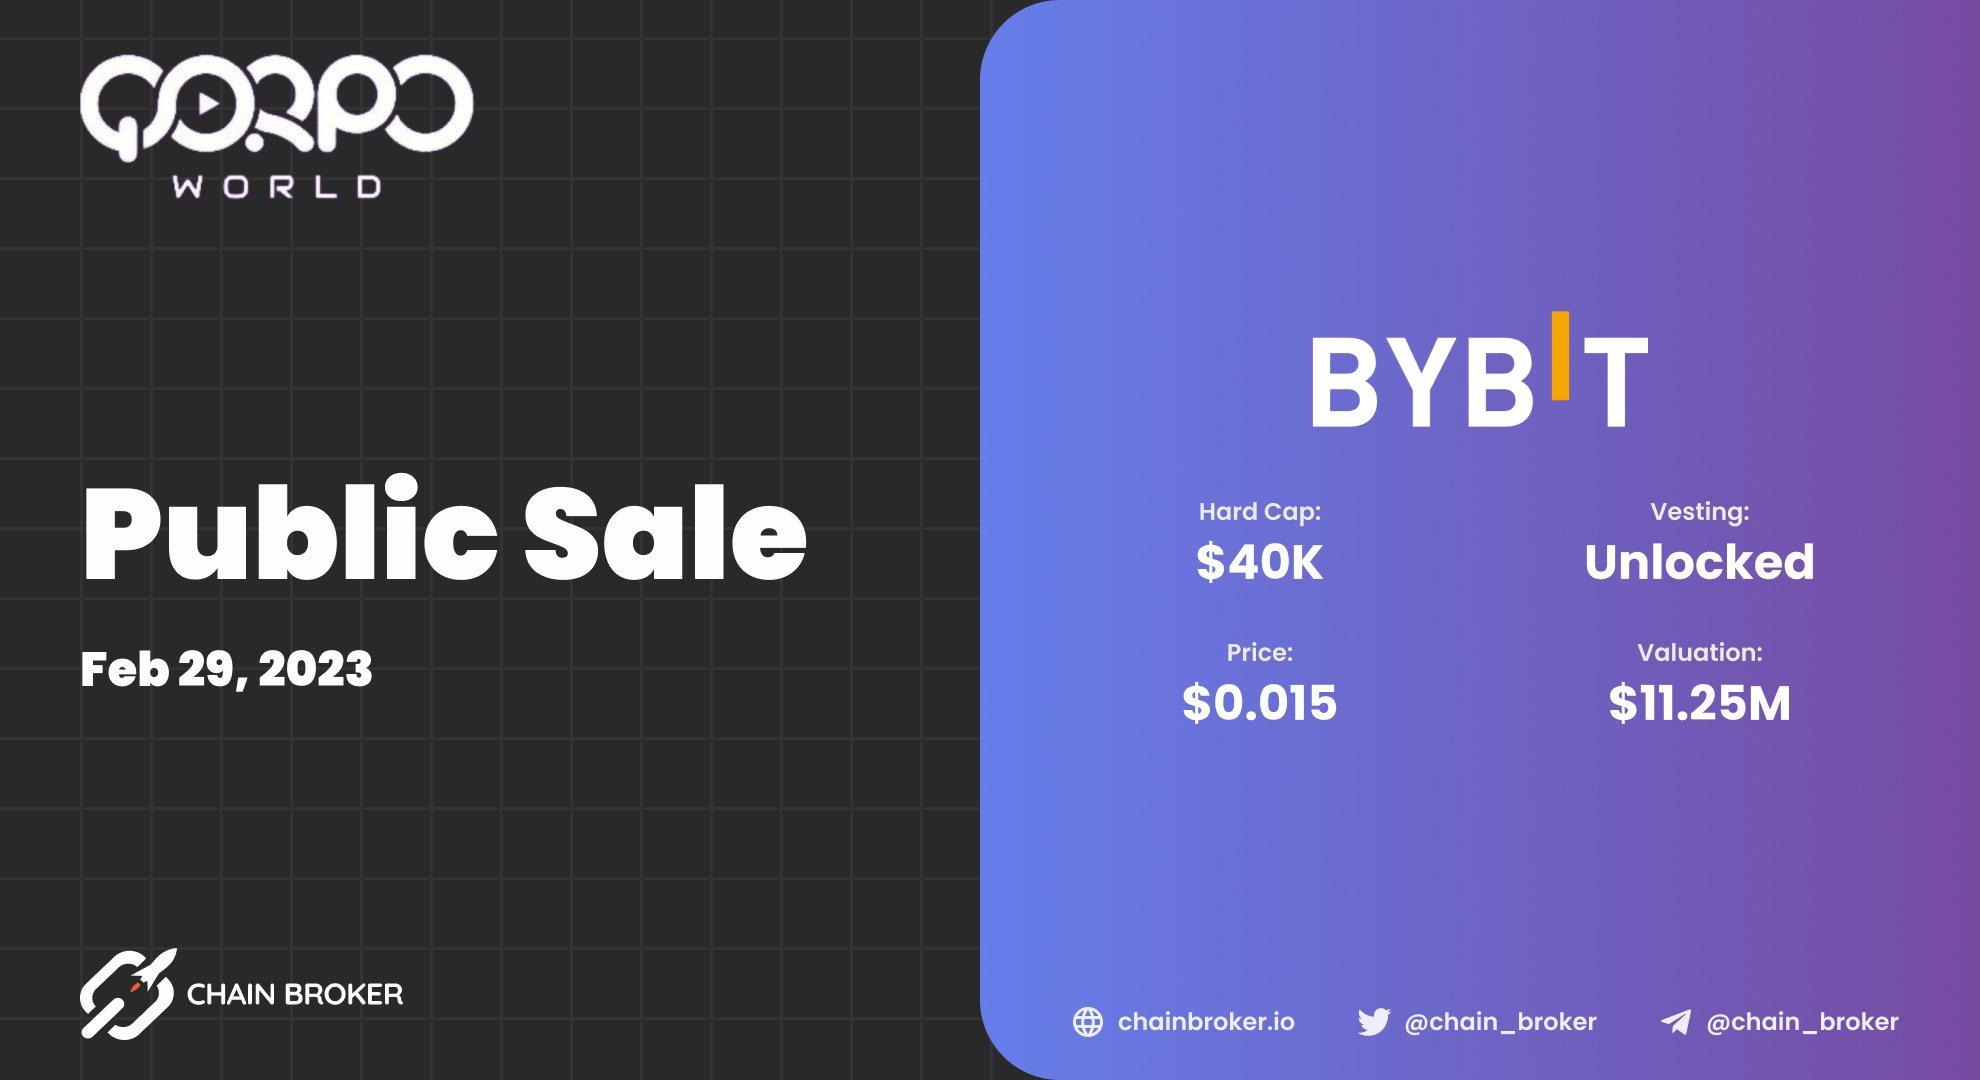 QORPO WORLD will conduct a Public Sale on Bybit